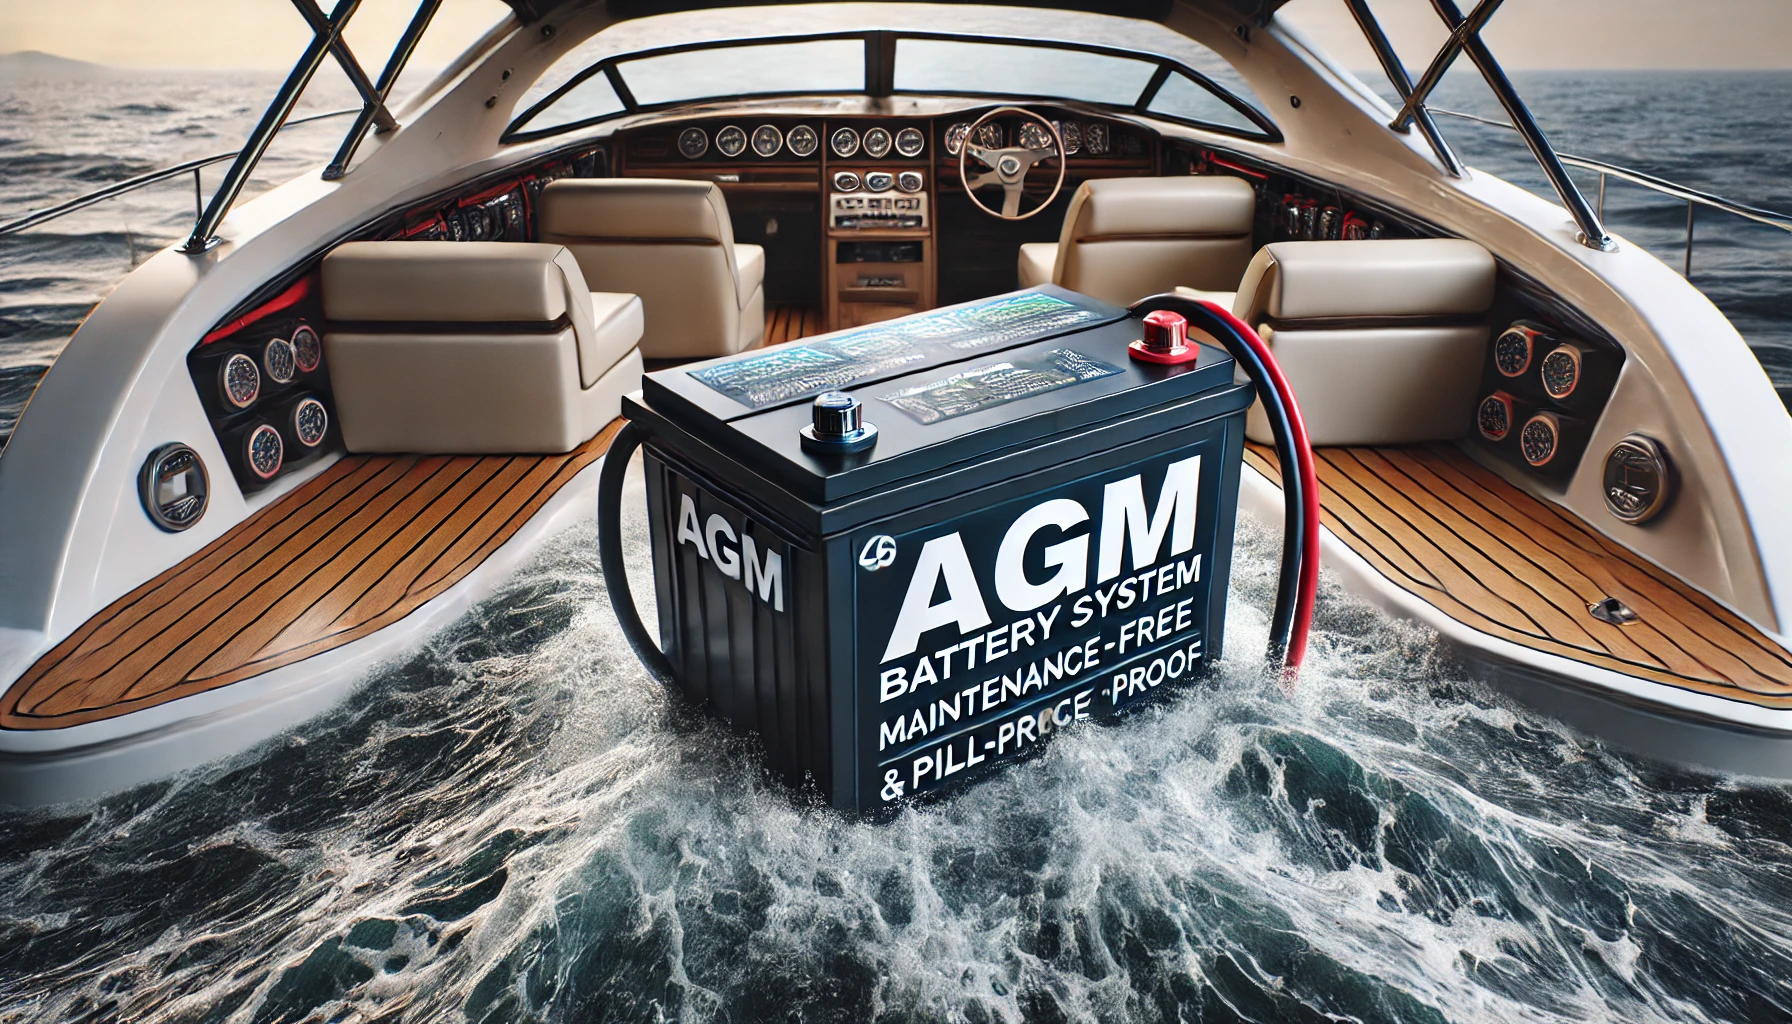 A-close-up-view-of-an-AGM-battery-system-installed-in-a-boat